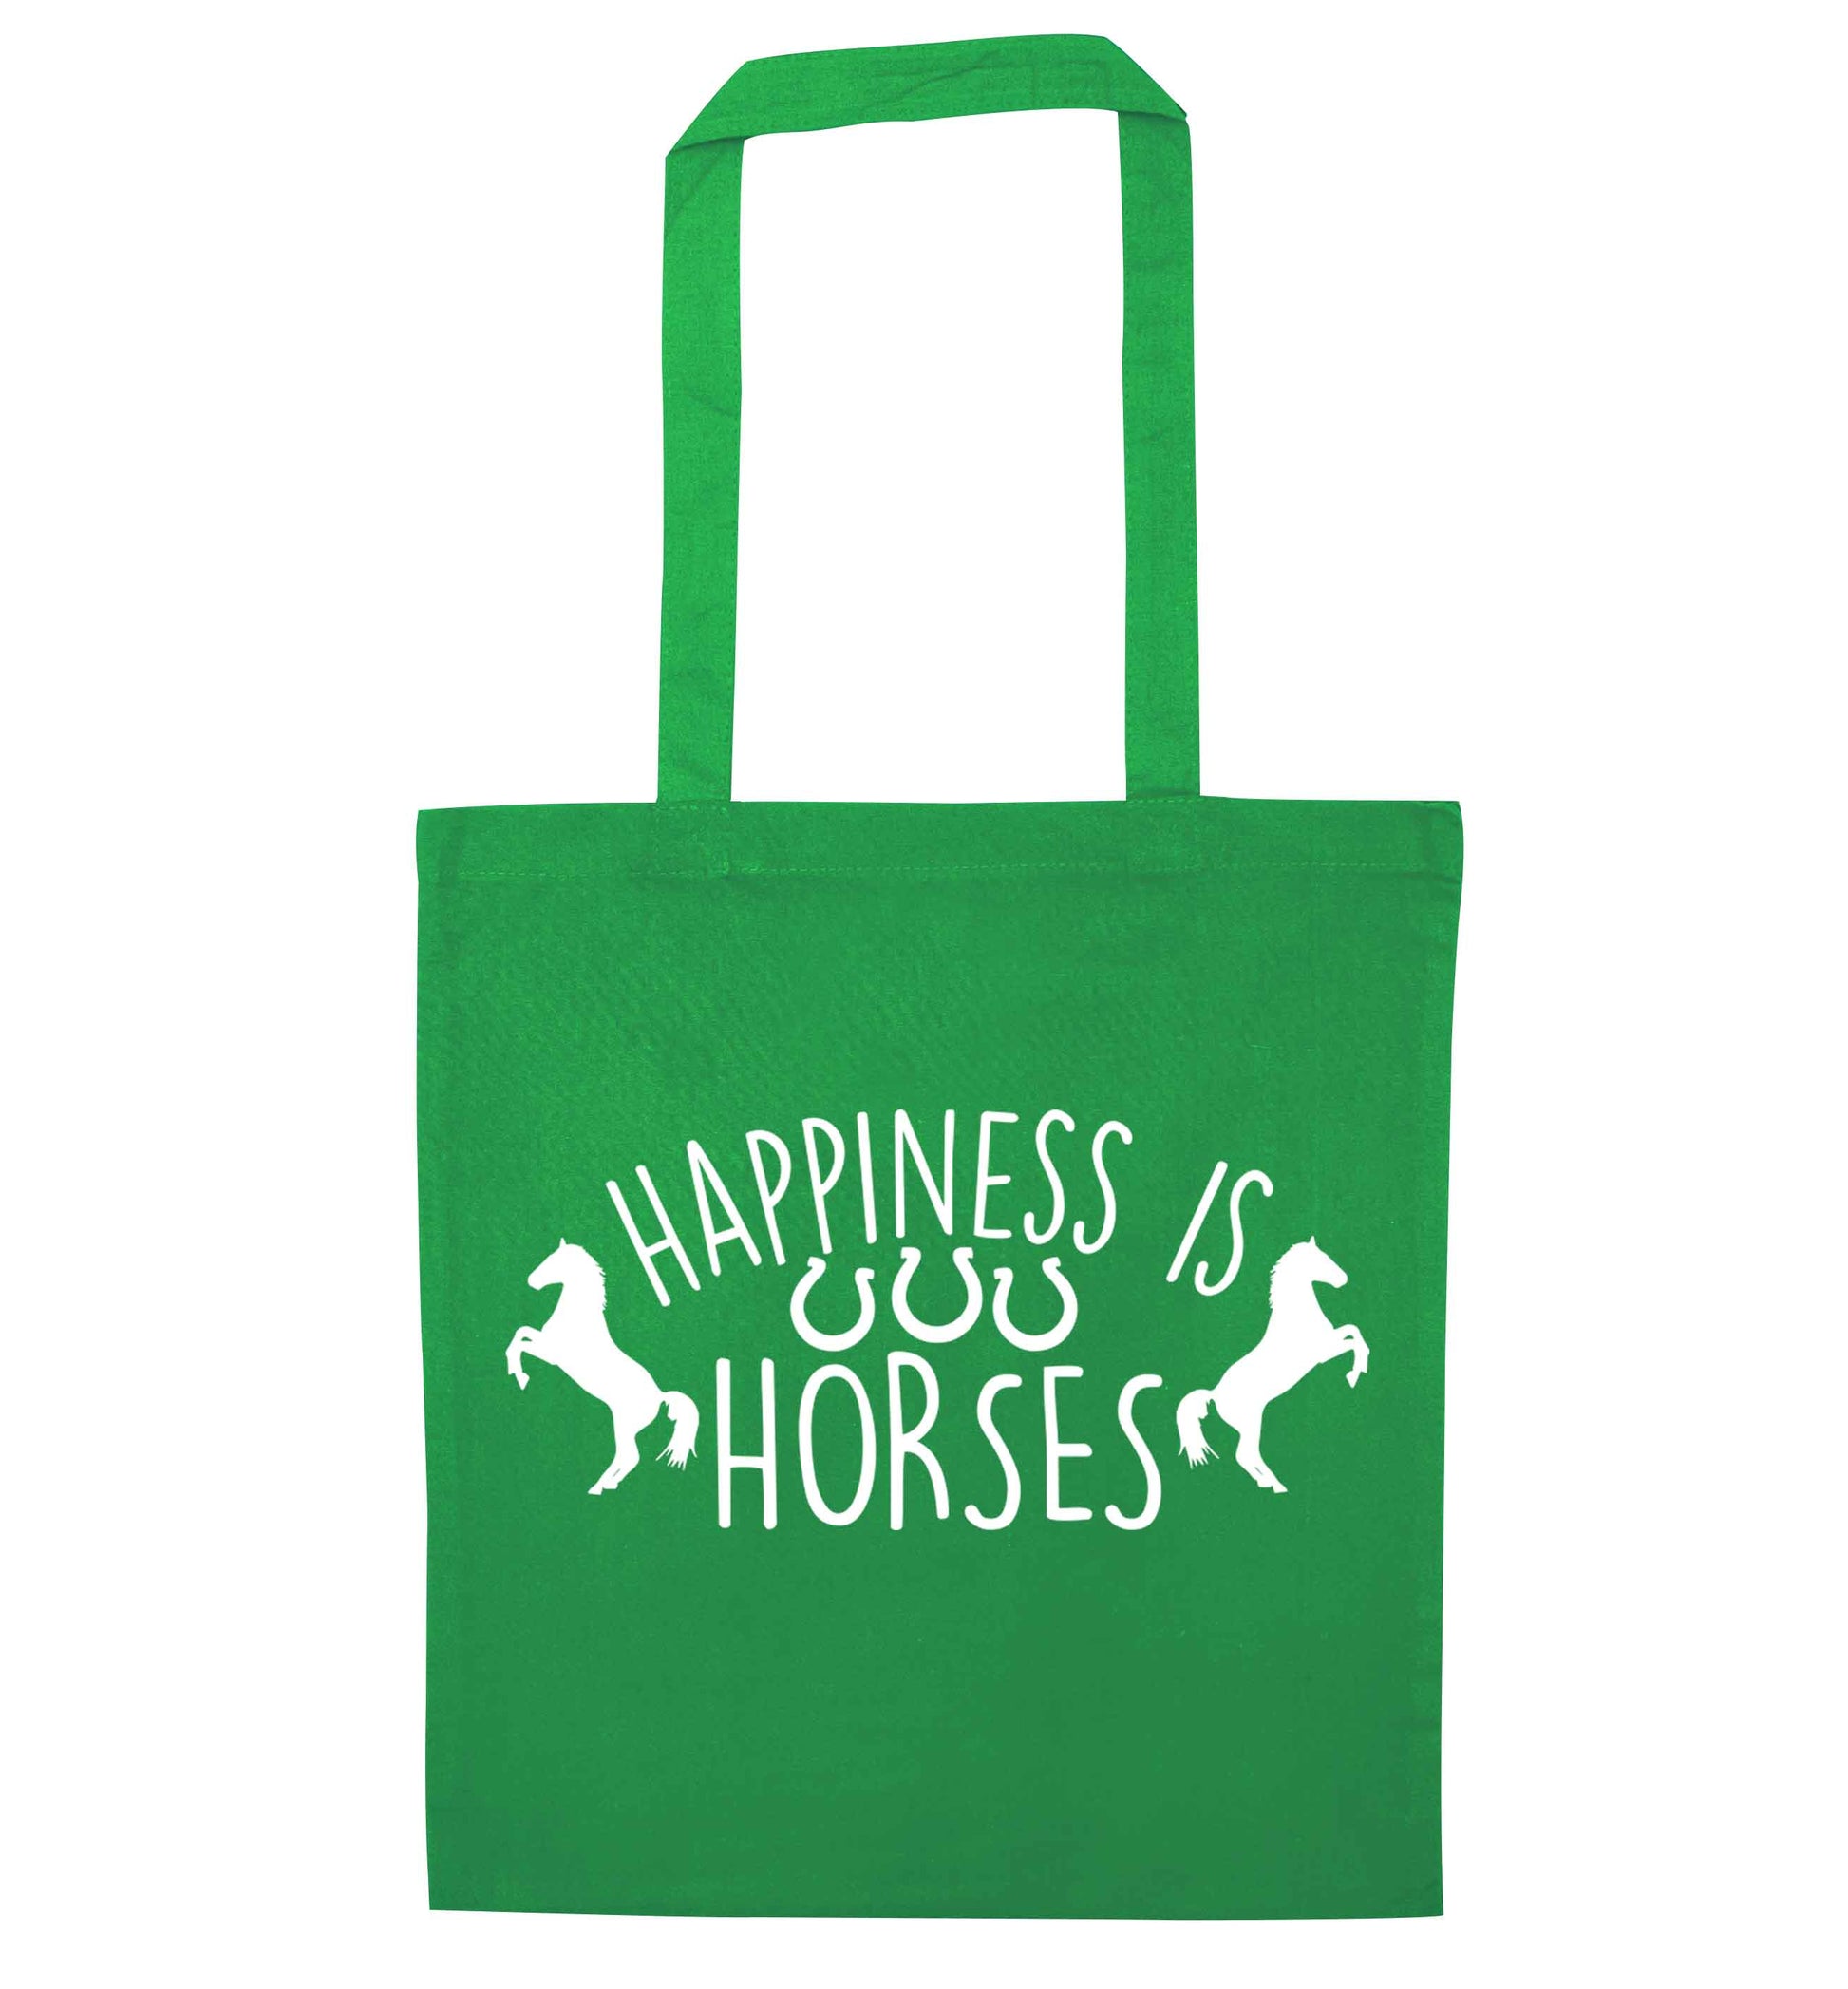 Happiness is horses green tote bag